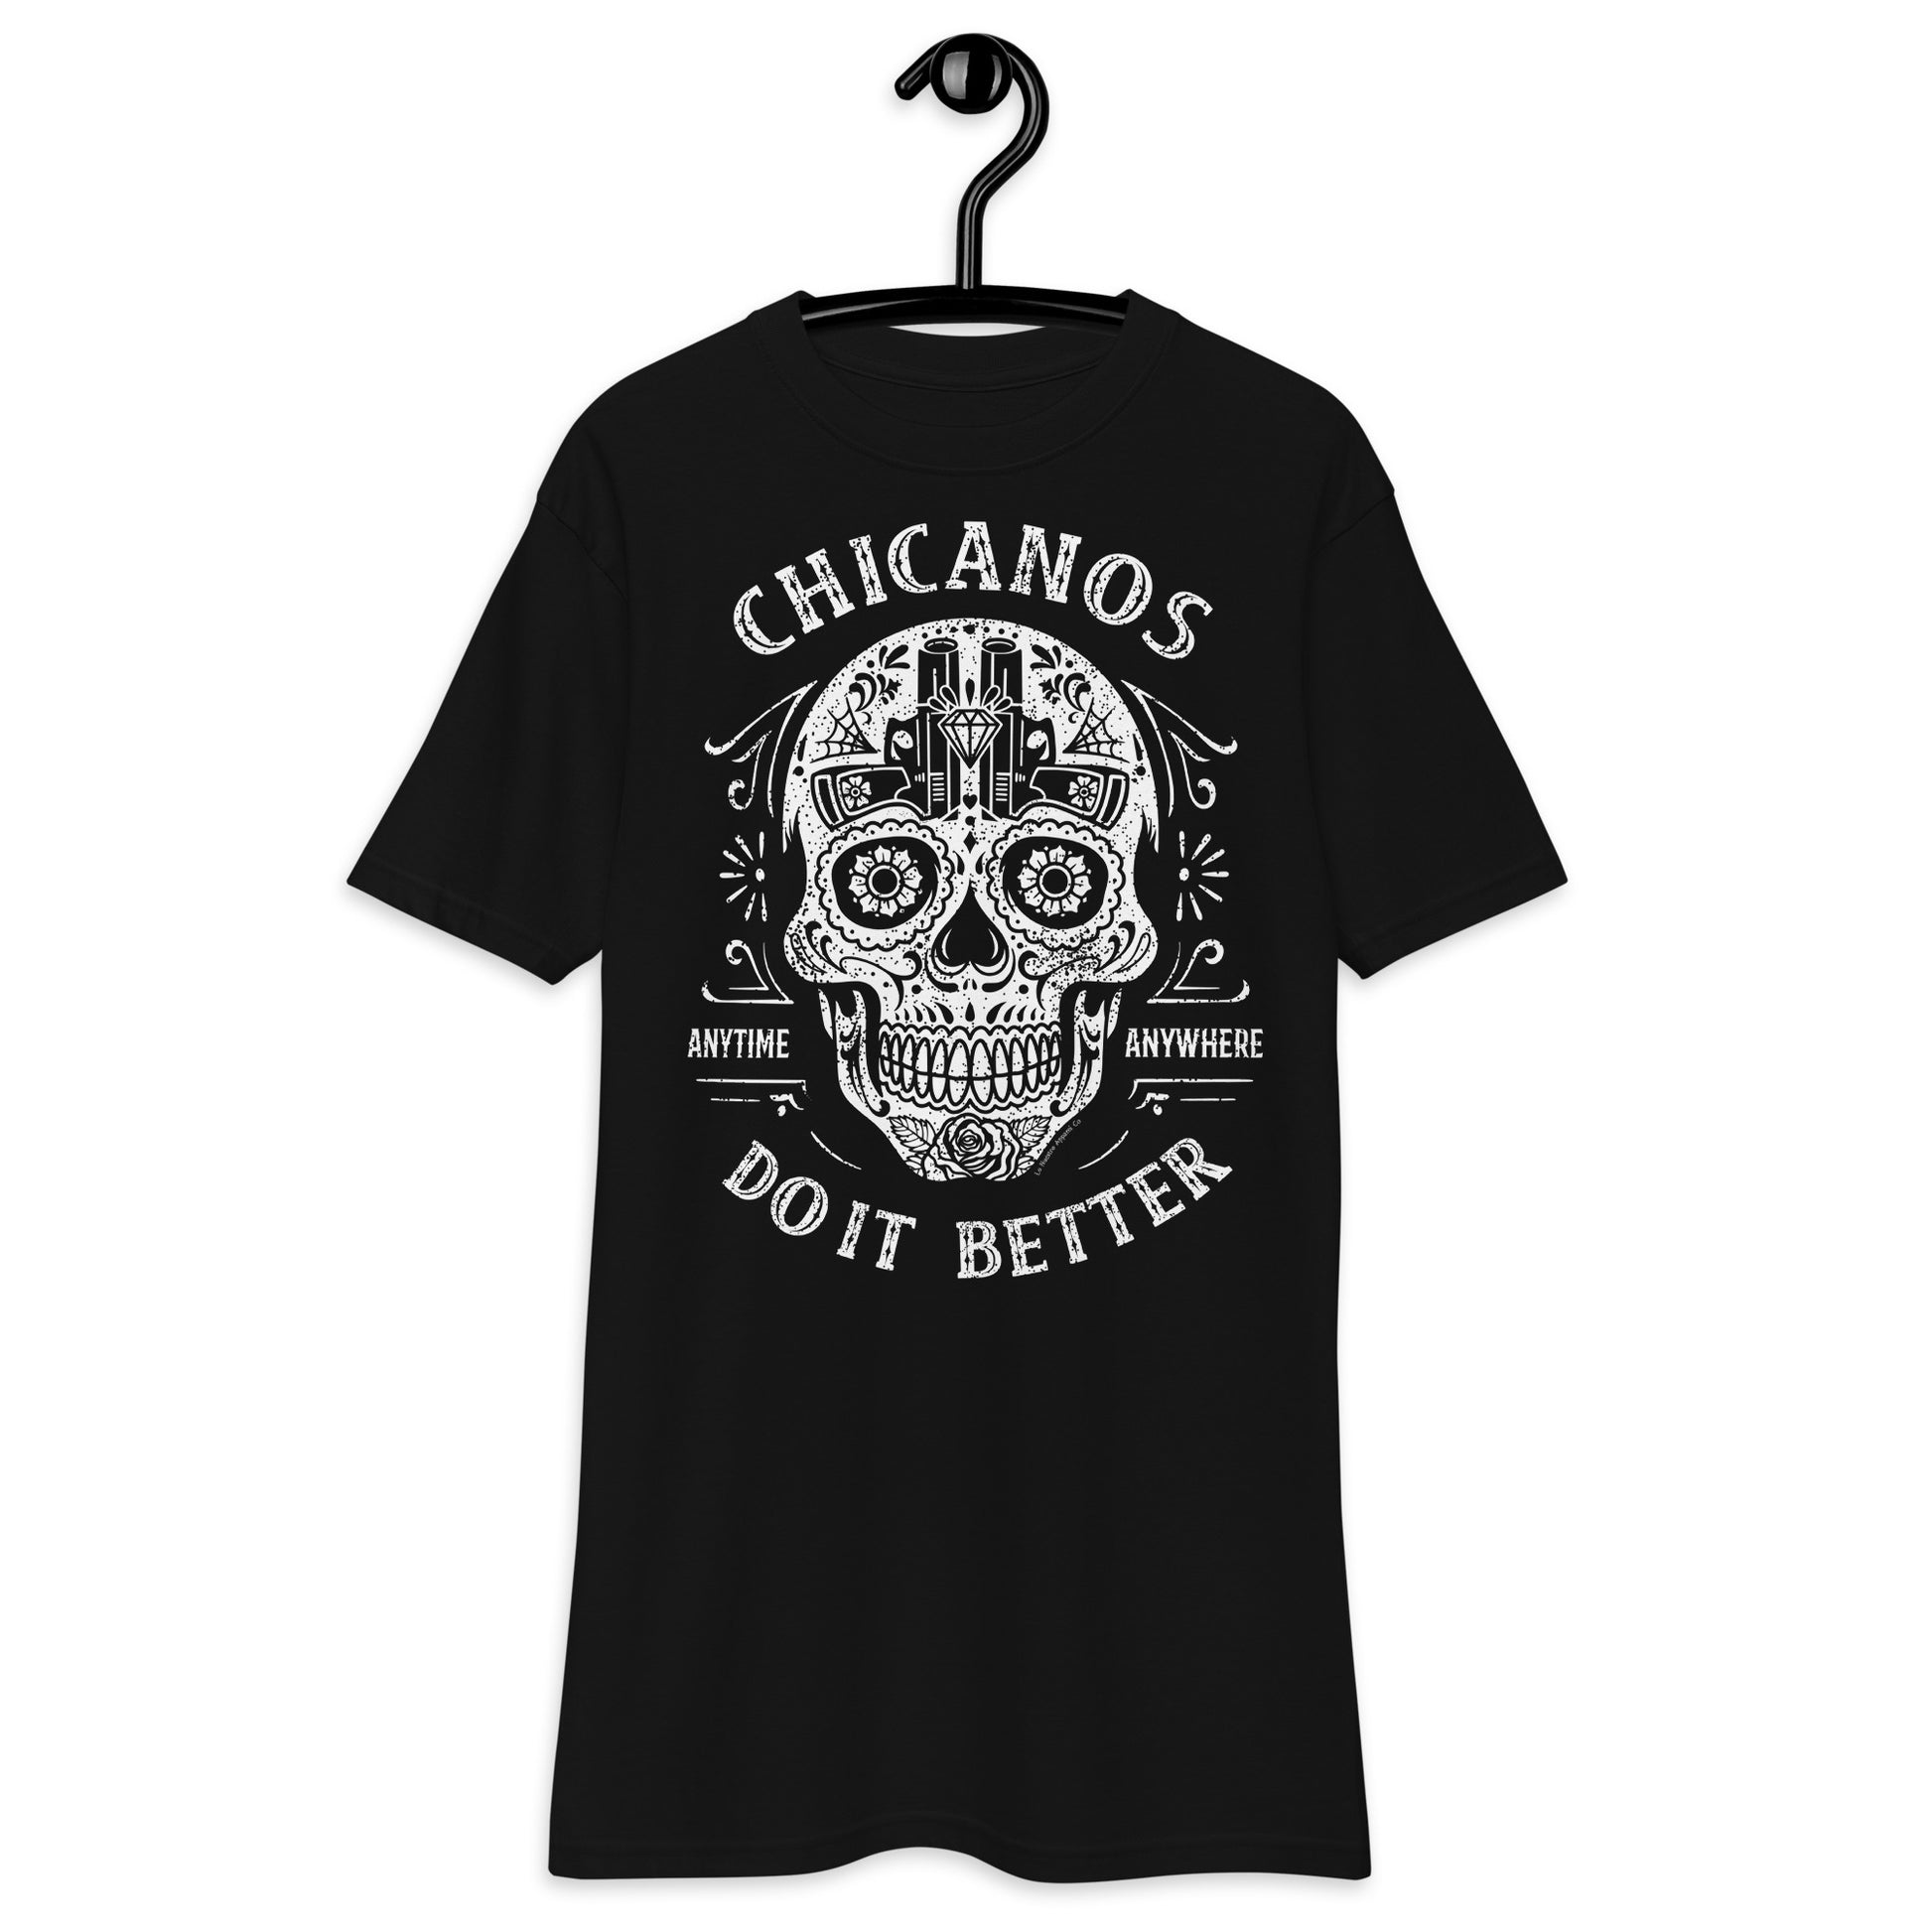 Front view of black "Chicanos Do It Better" T-shirt featuring a sugar skull design with text.